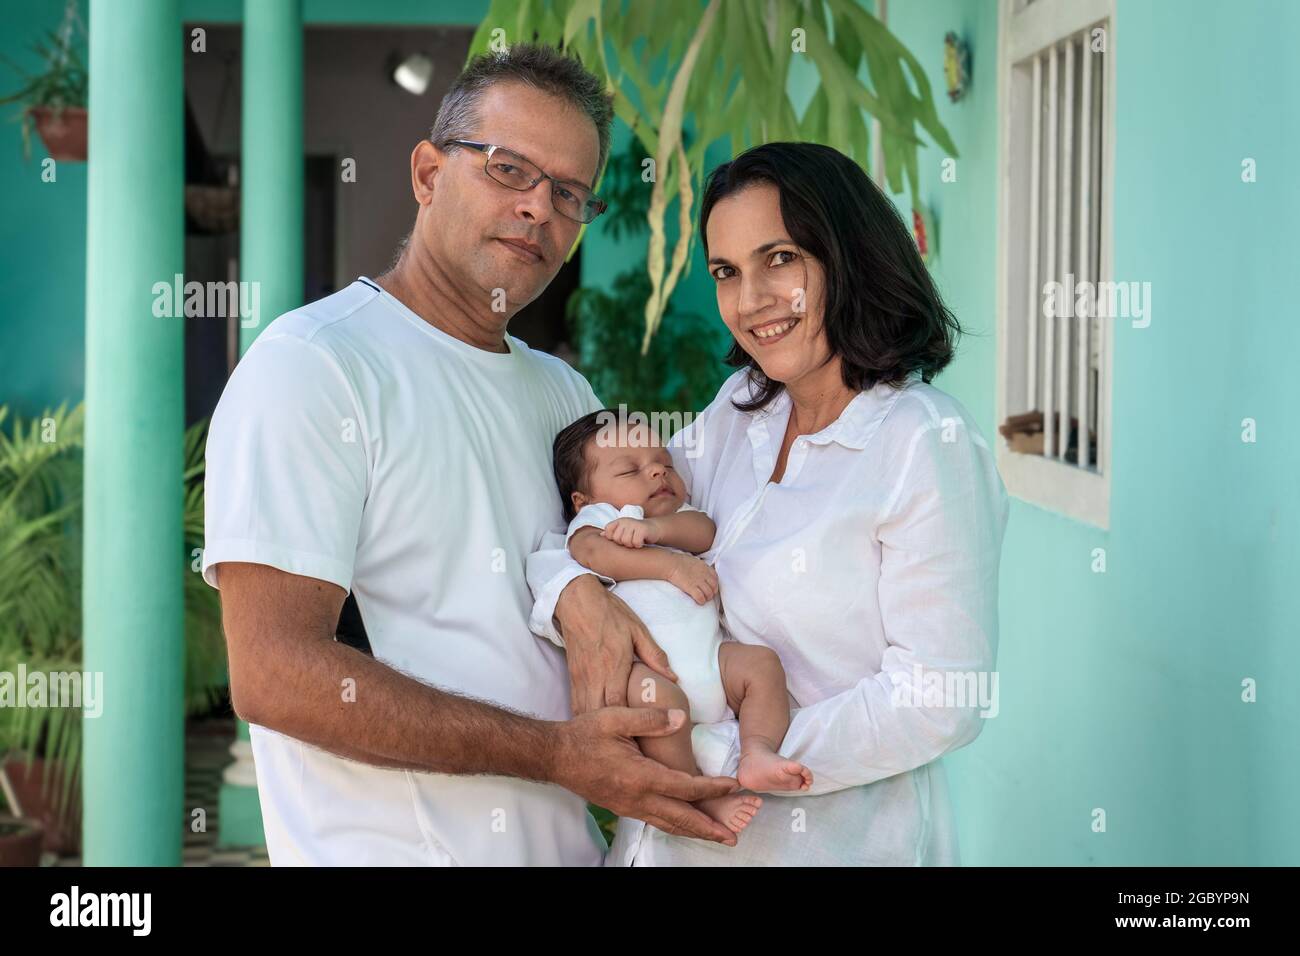 Photo of a baby in the arms of a woman and a man Stock Photo